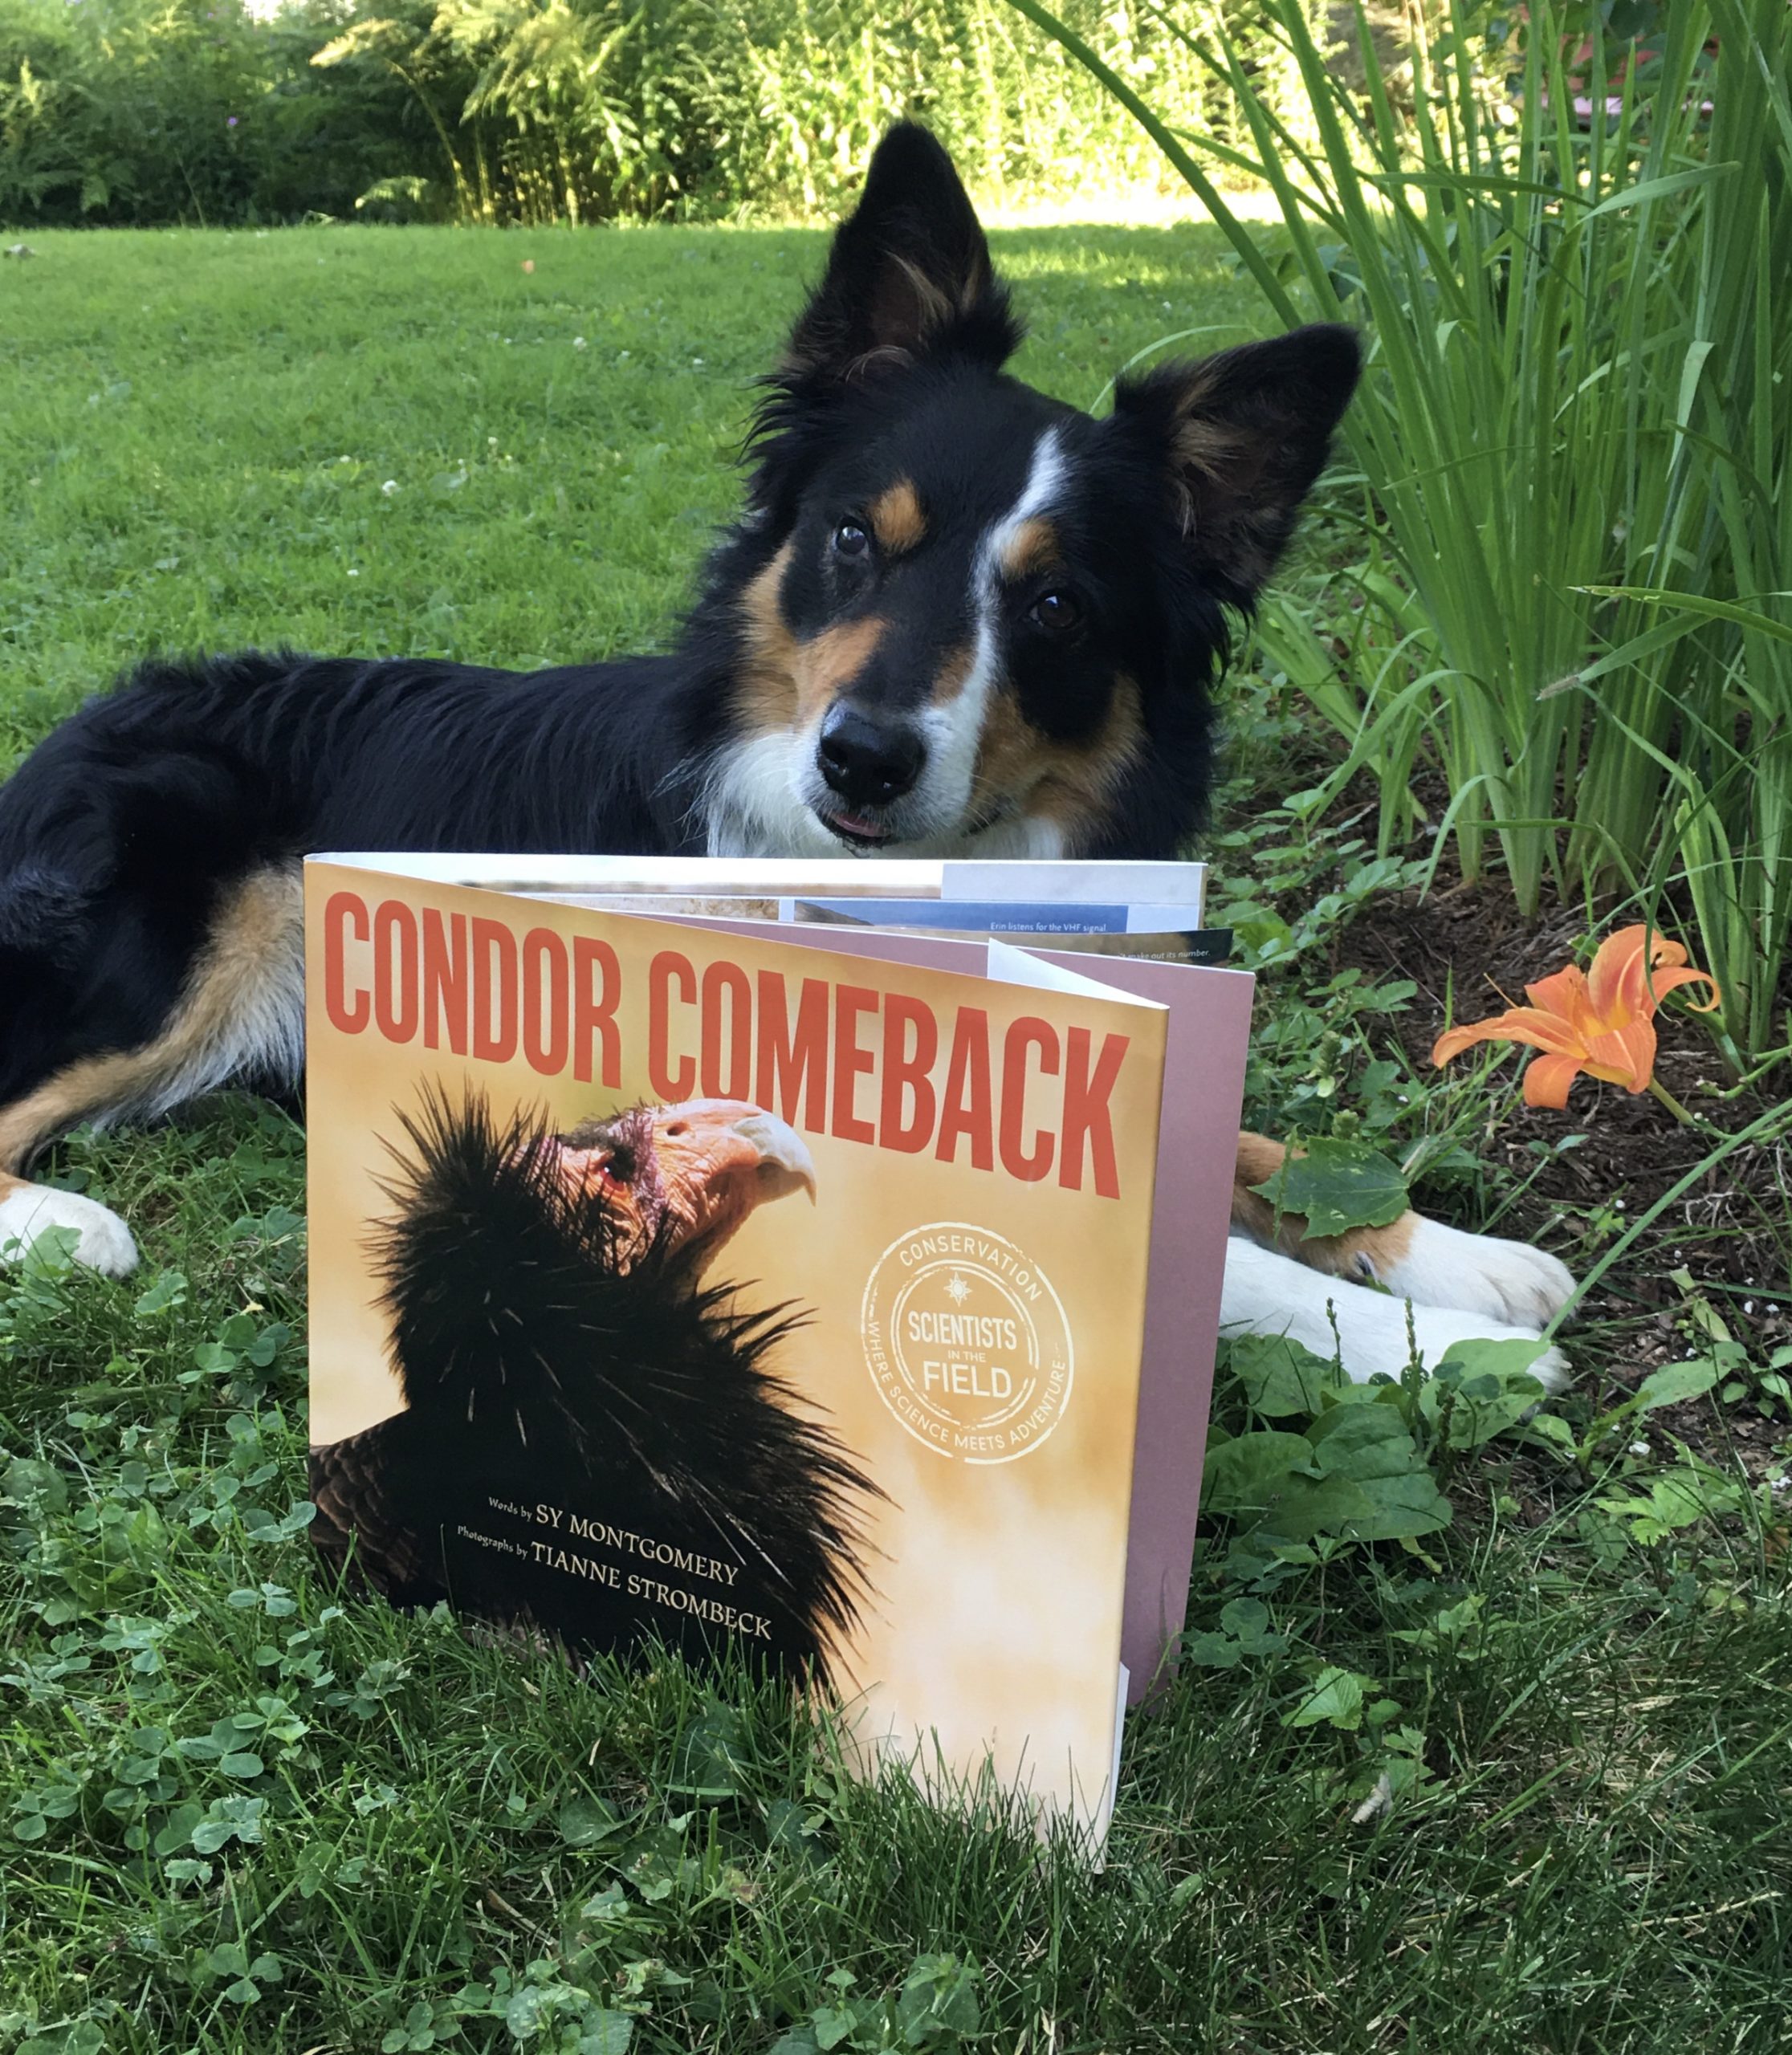 The Condor Comeback book is out and this reader likes what he sees.